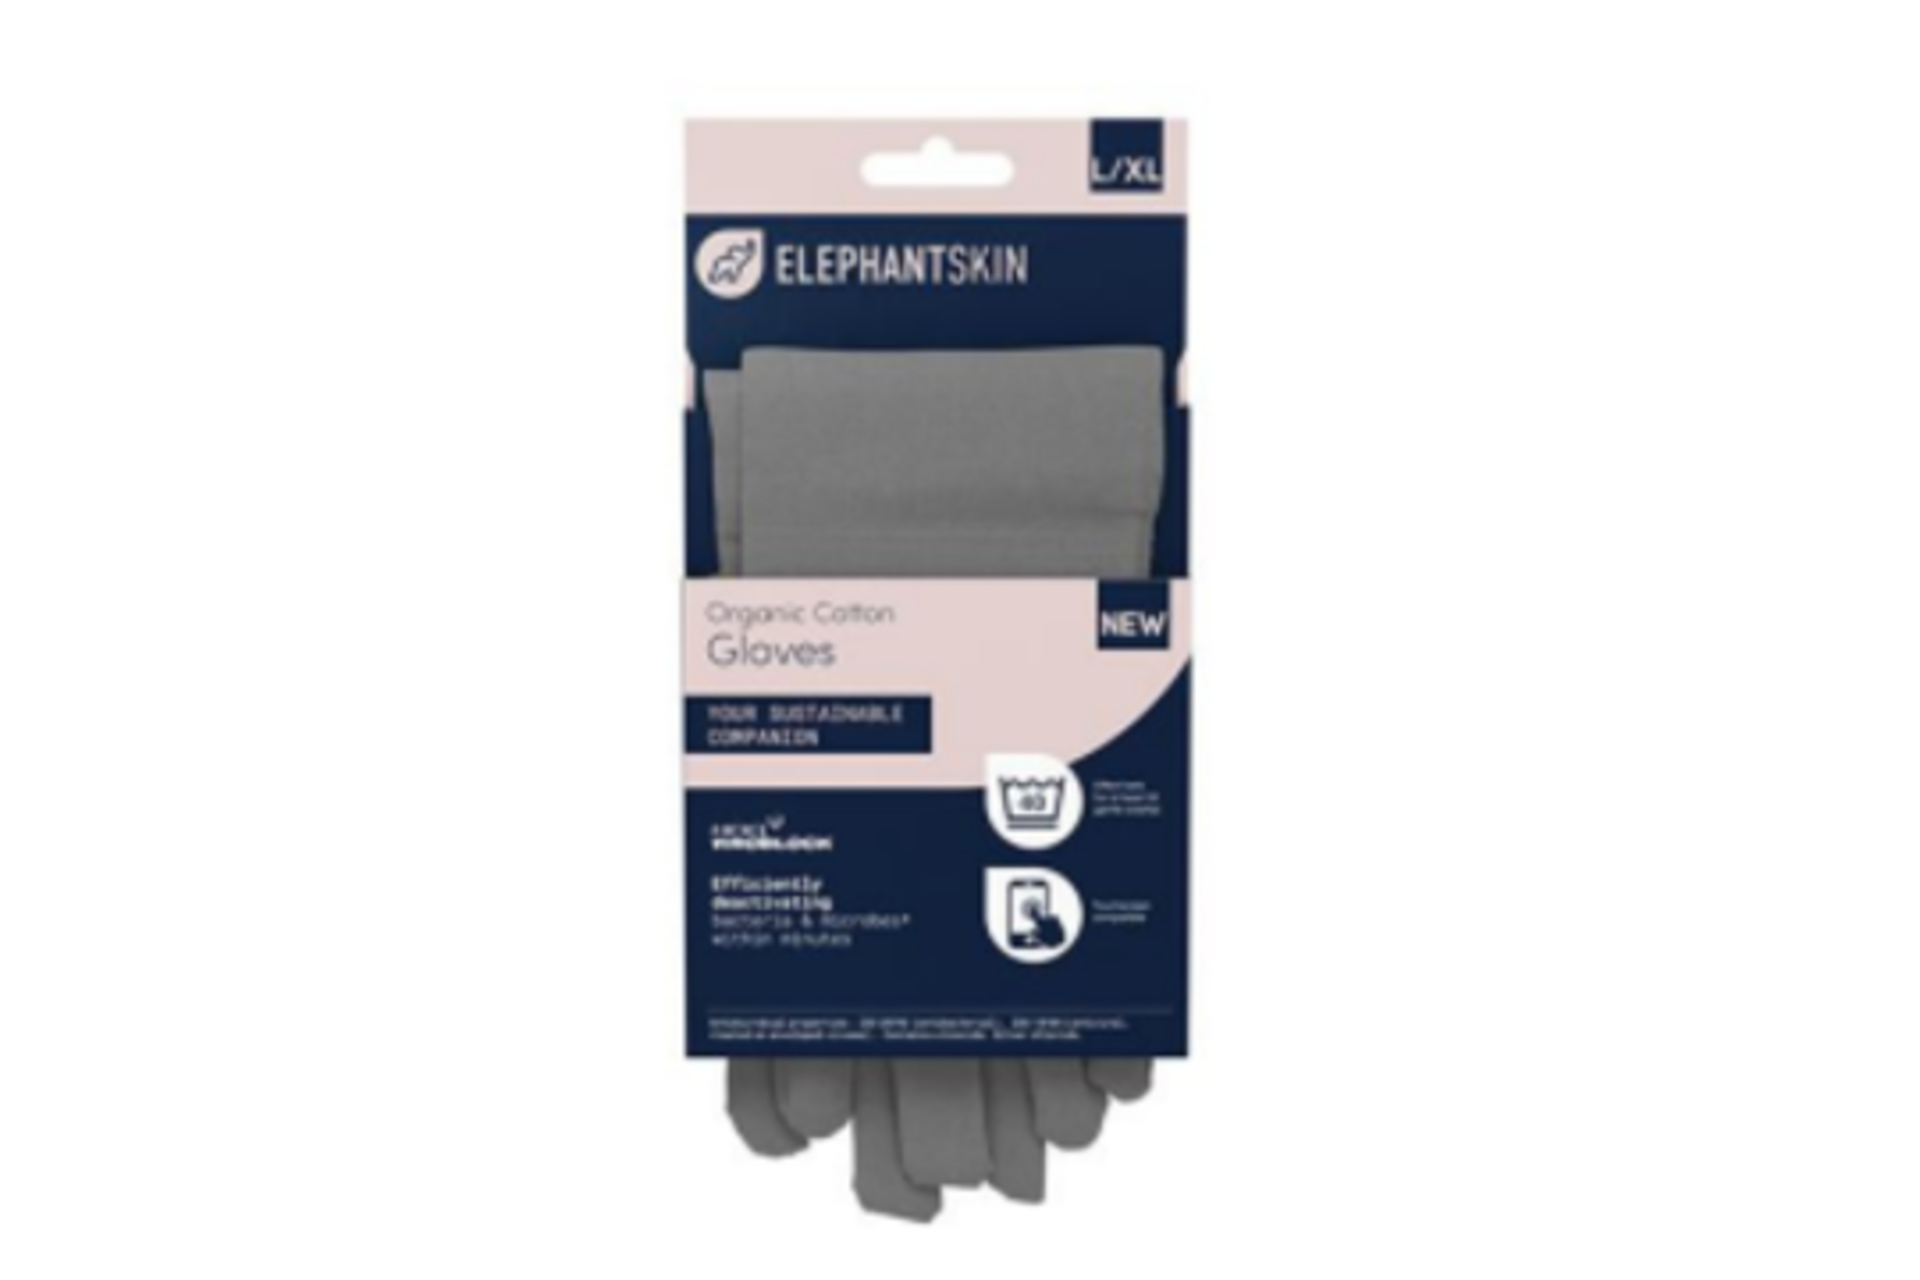 50 X BRAND NEW ELEPHANTSKIN ANTIBACTERIAL GLOVES SIZE S/M (COLOURS MAY VARY) - Image 2 of 2